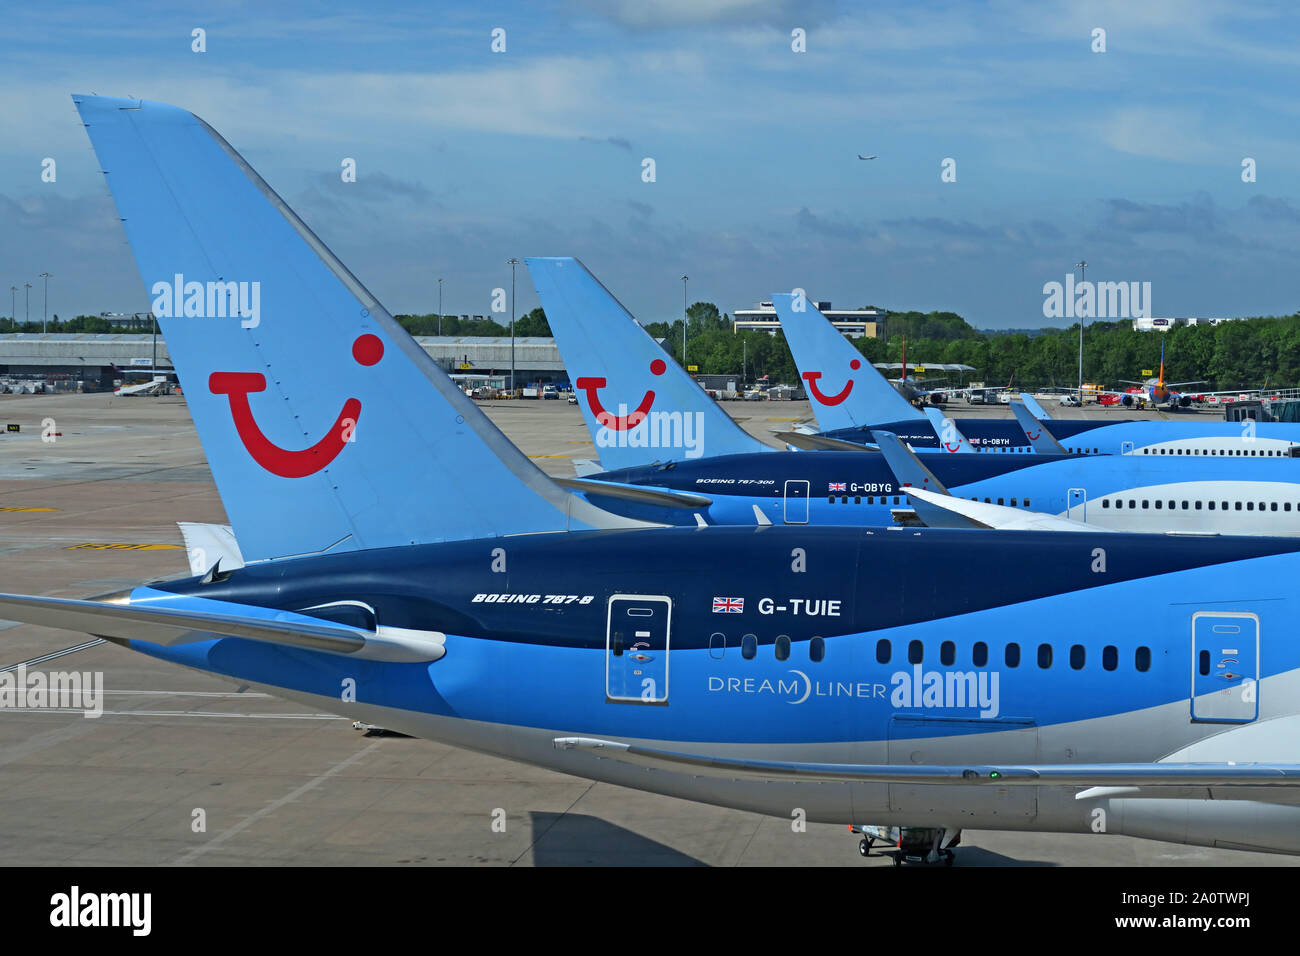 Three TUI Holiday Group Aircraft - Manchester Ringway Airport, Greater Manchester, North West England, UK - 787-8 G-TUIE Dreamliner Stock Photo